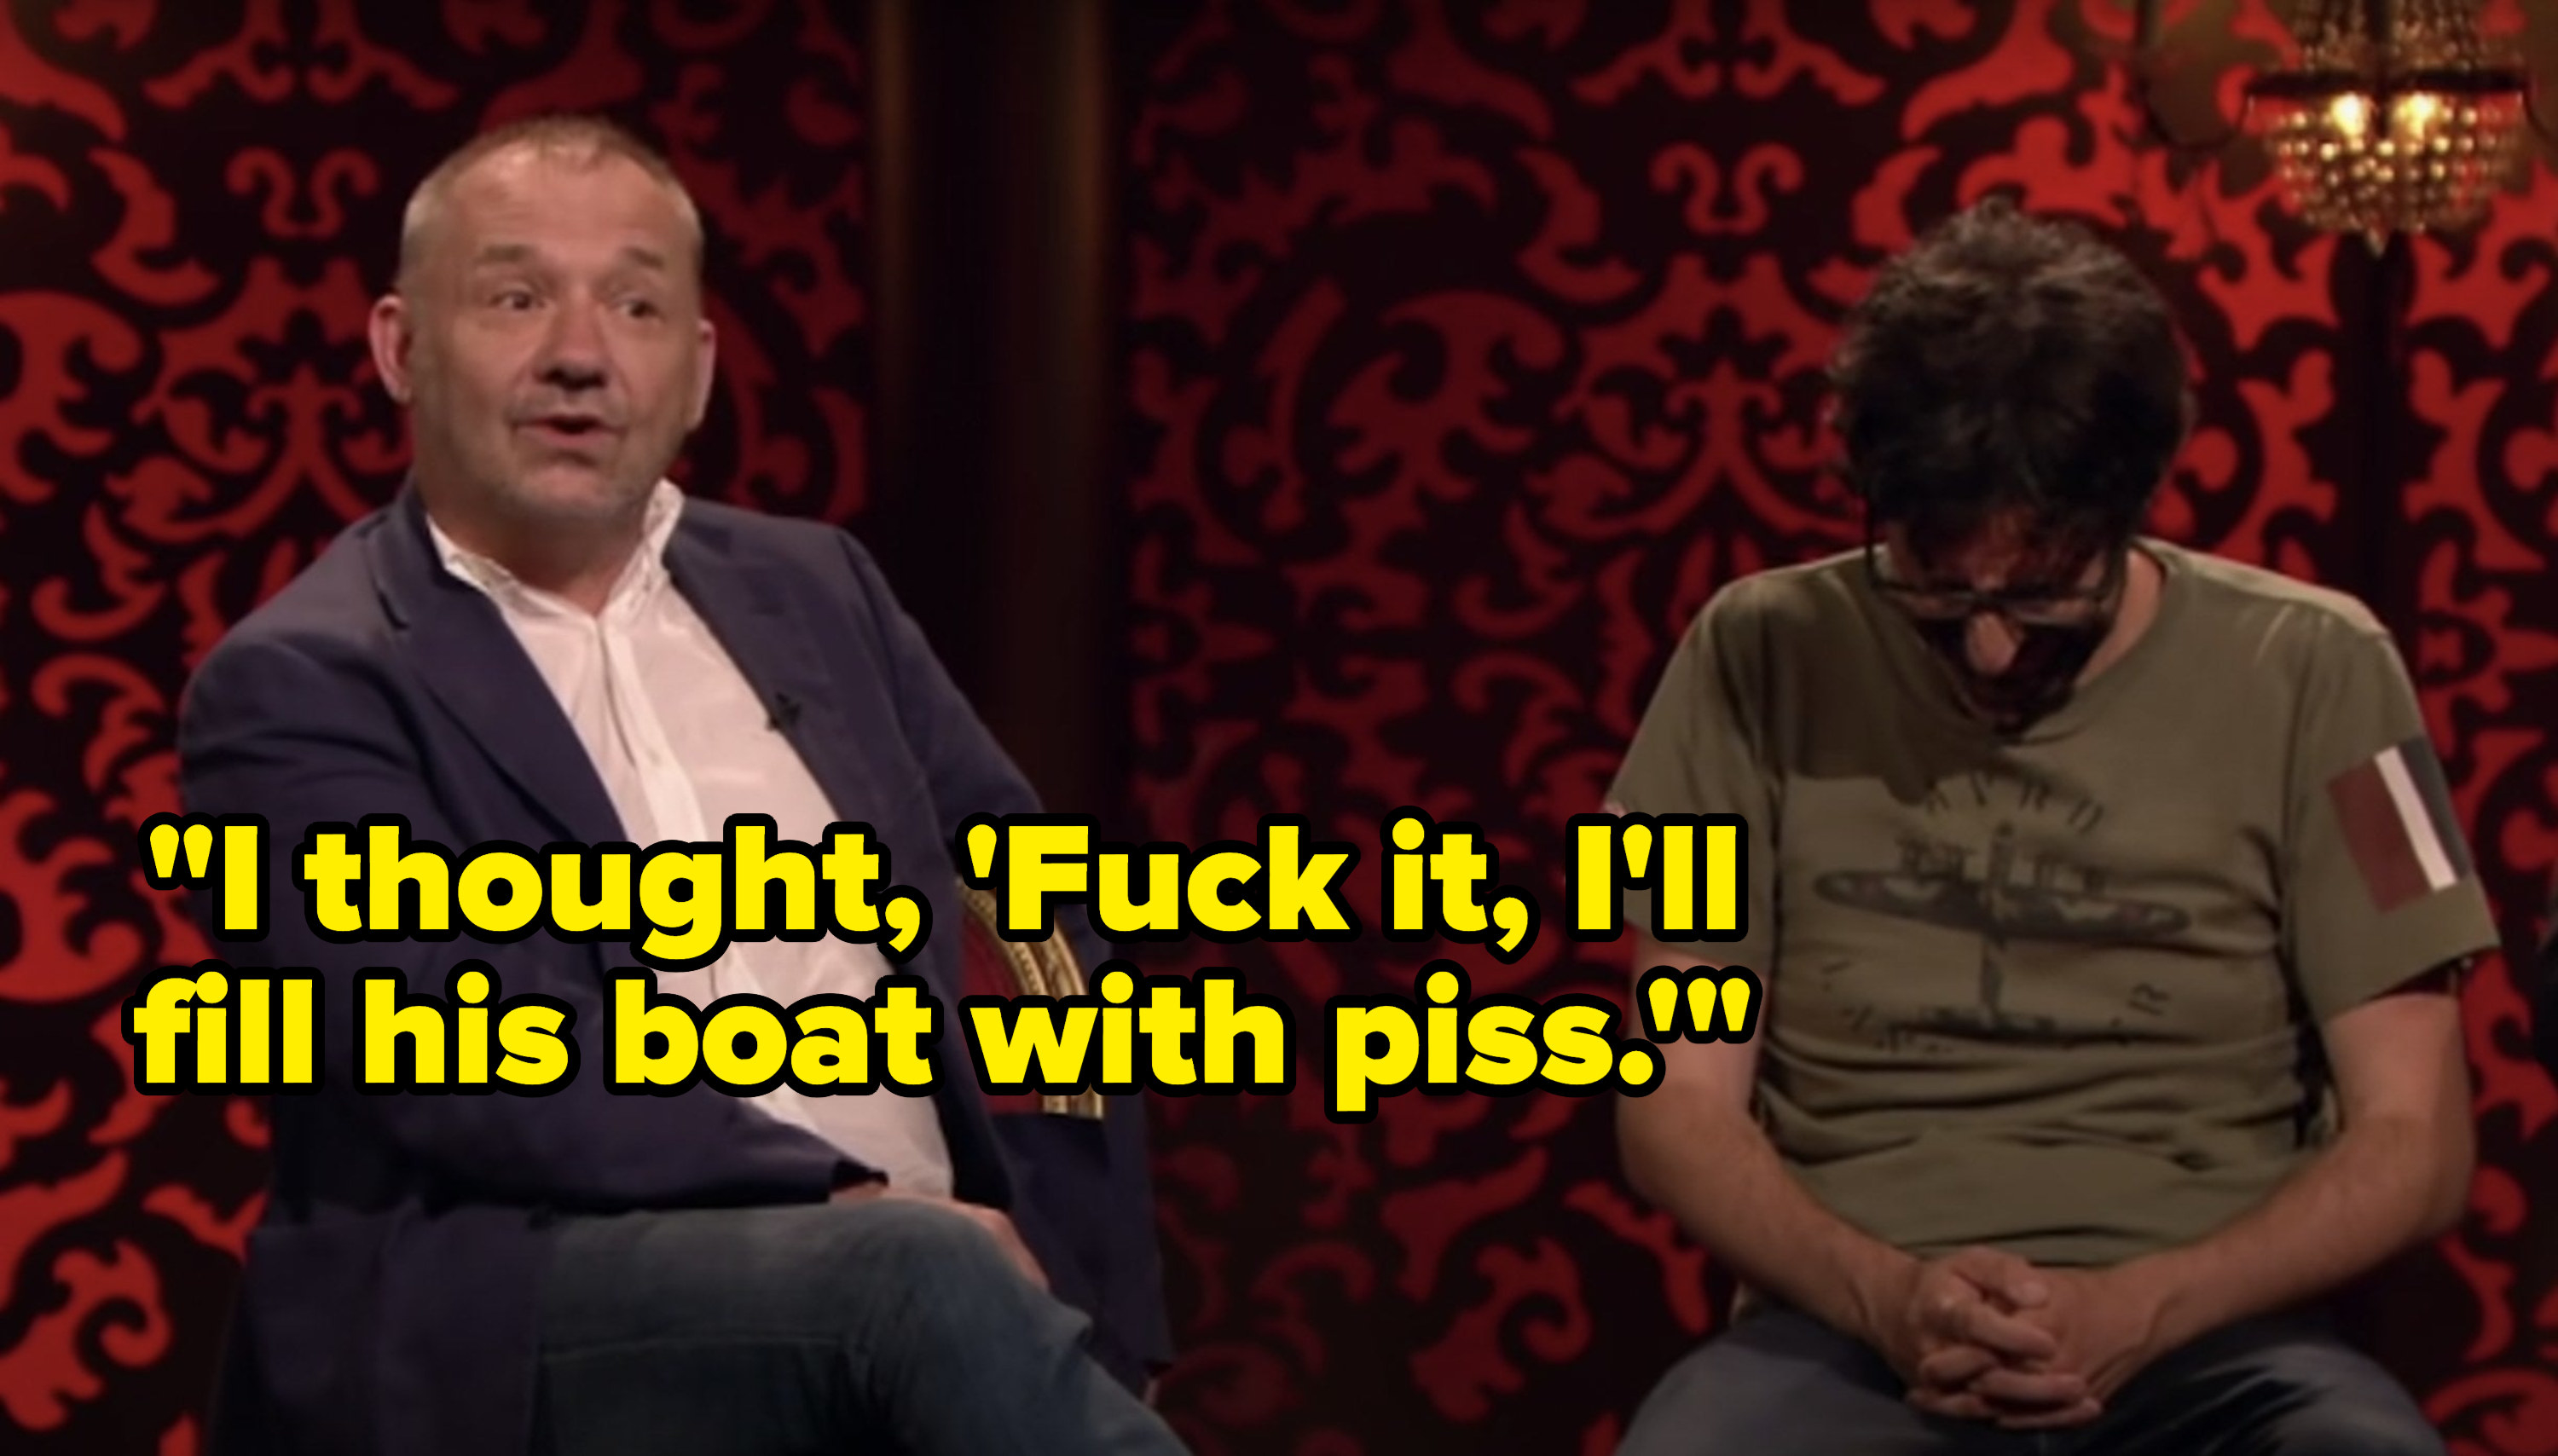 Bob Mortimer says, I thought, Fuck it, Ill fill his boat with piss